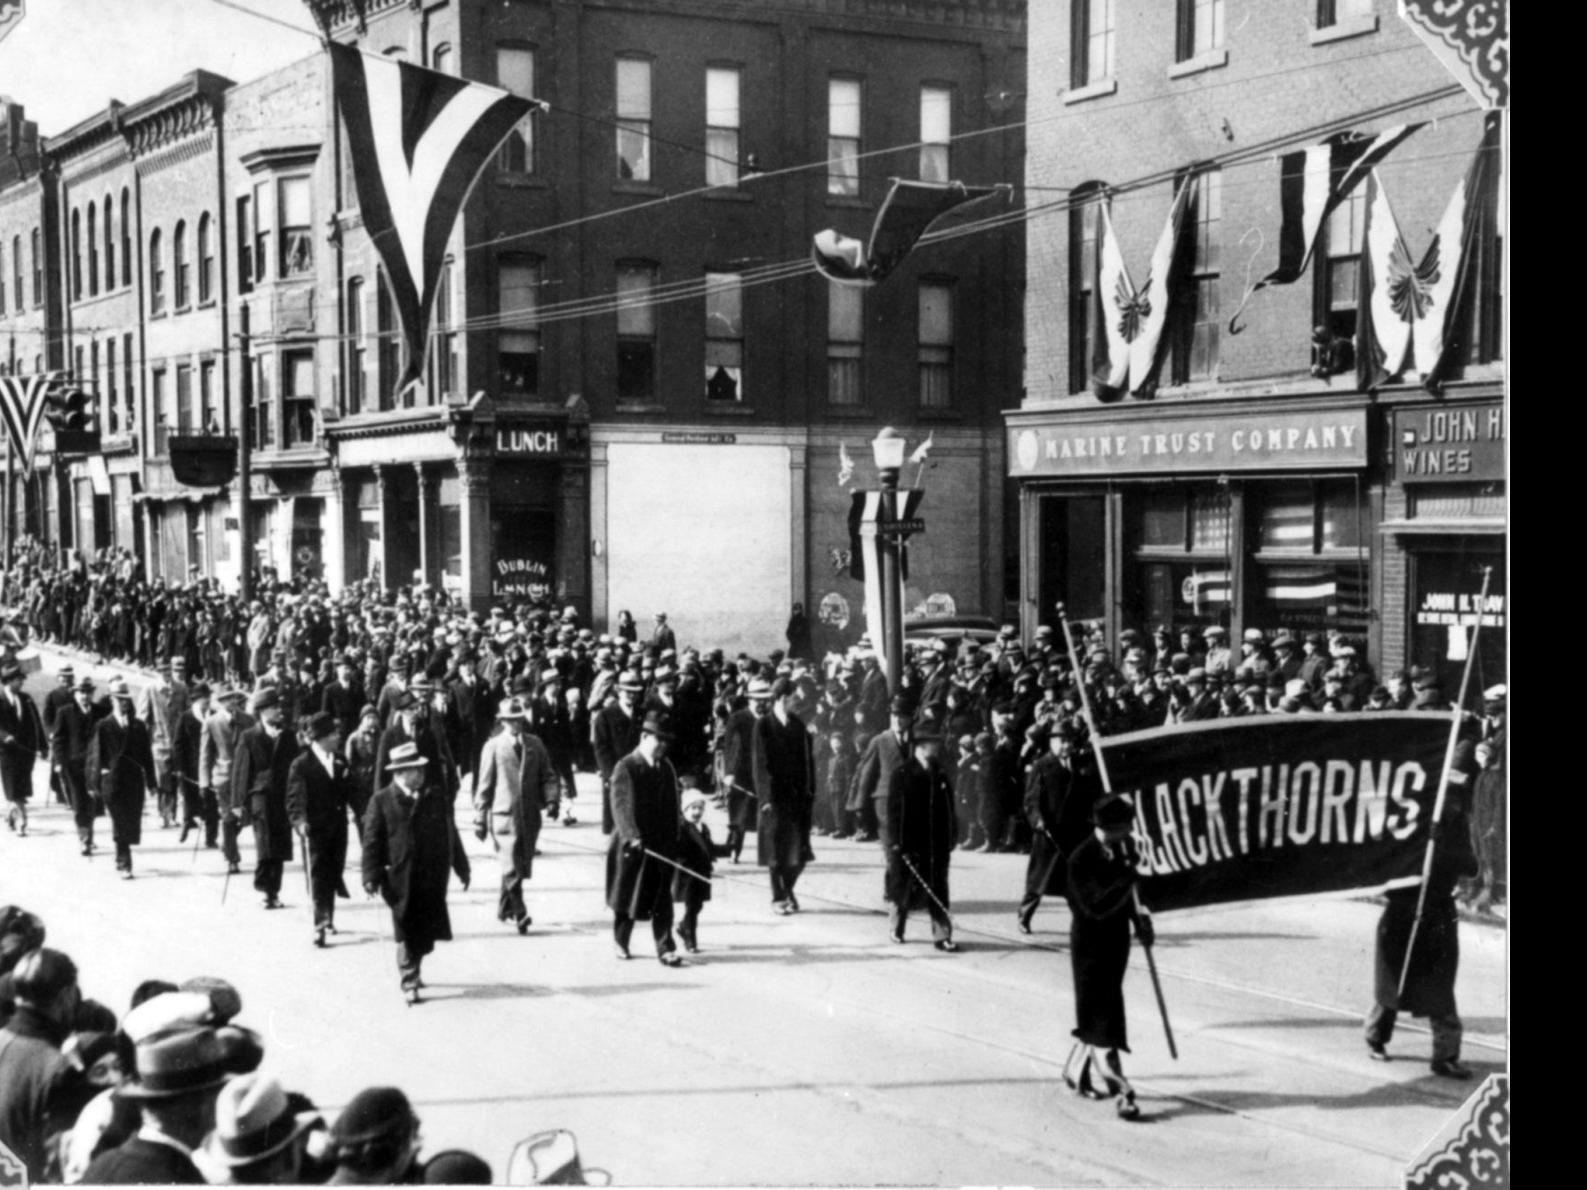 St. Patrick's parade's storied past clashes with history | Local News | buffalonews.com